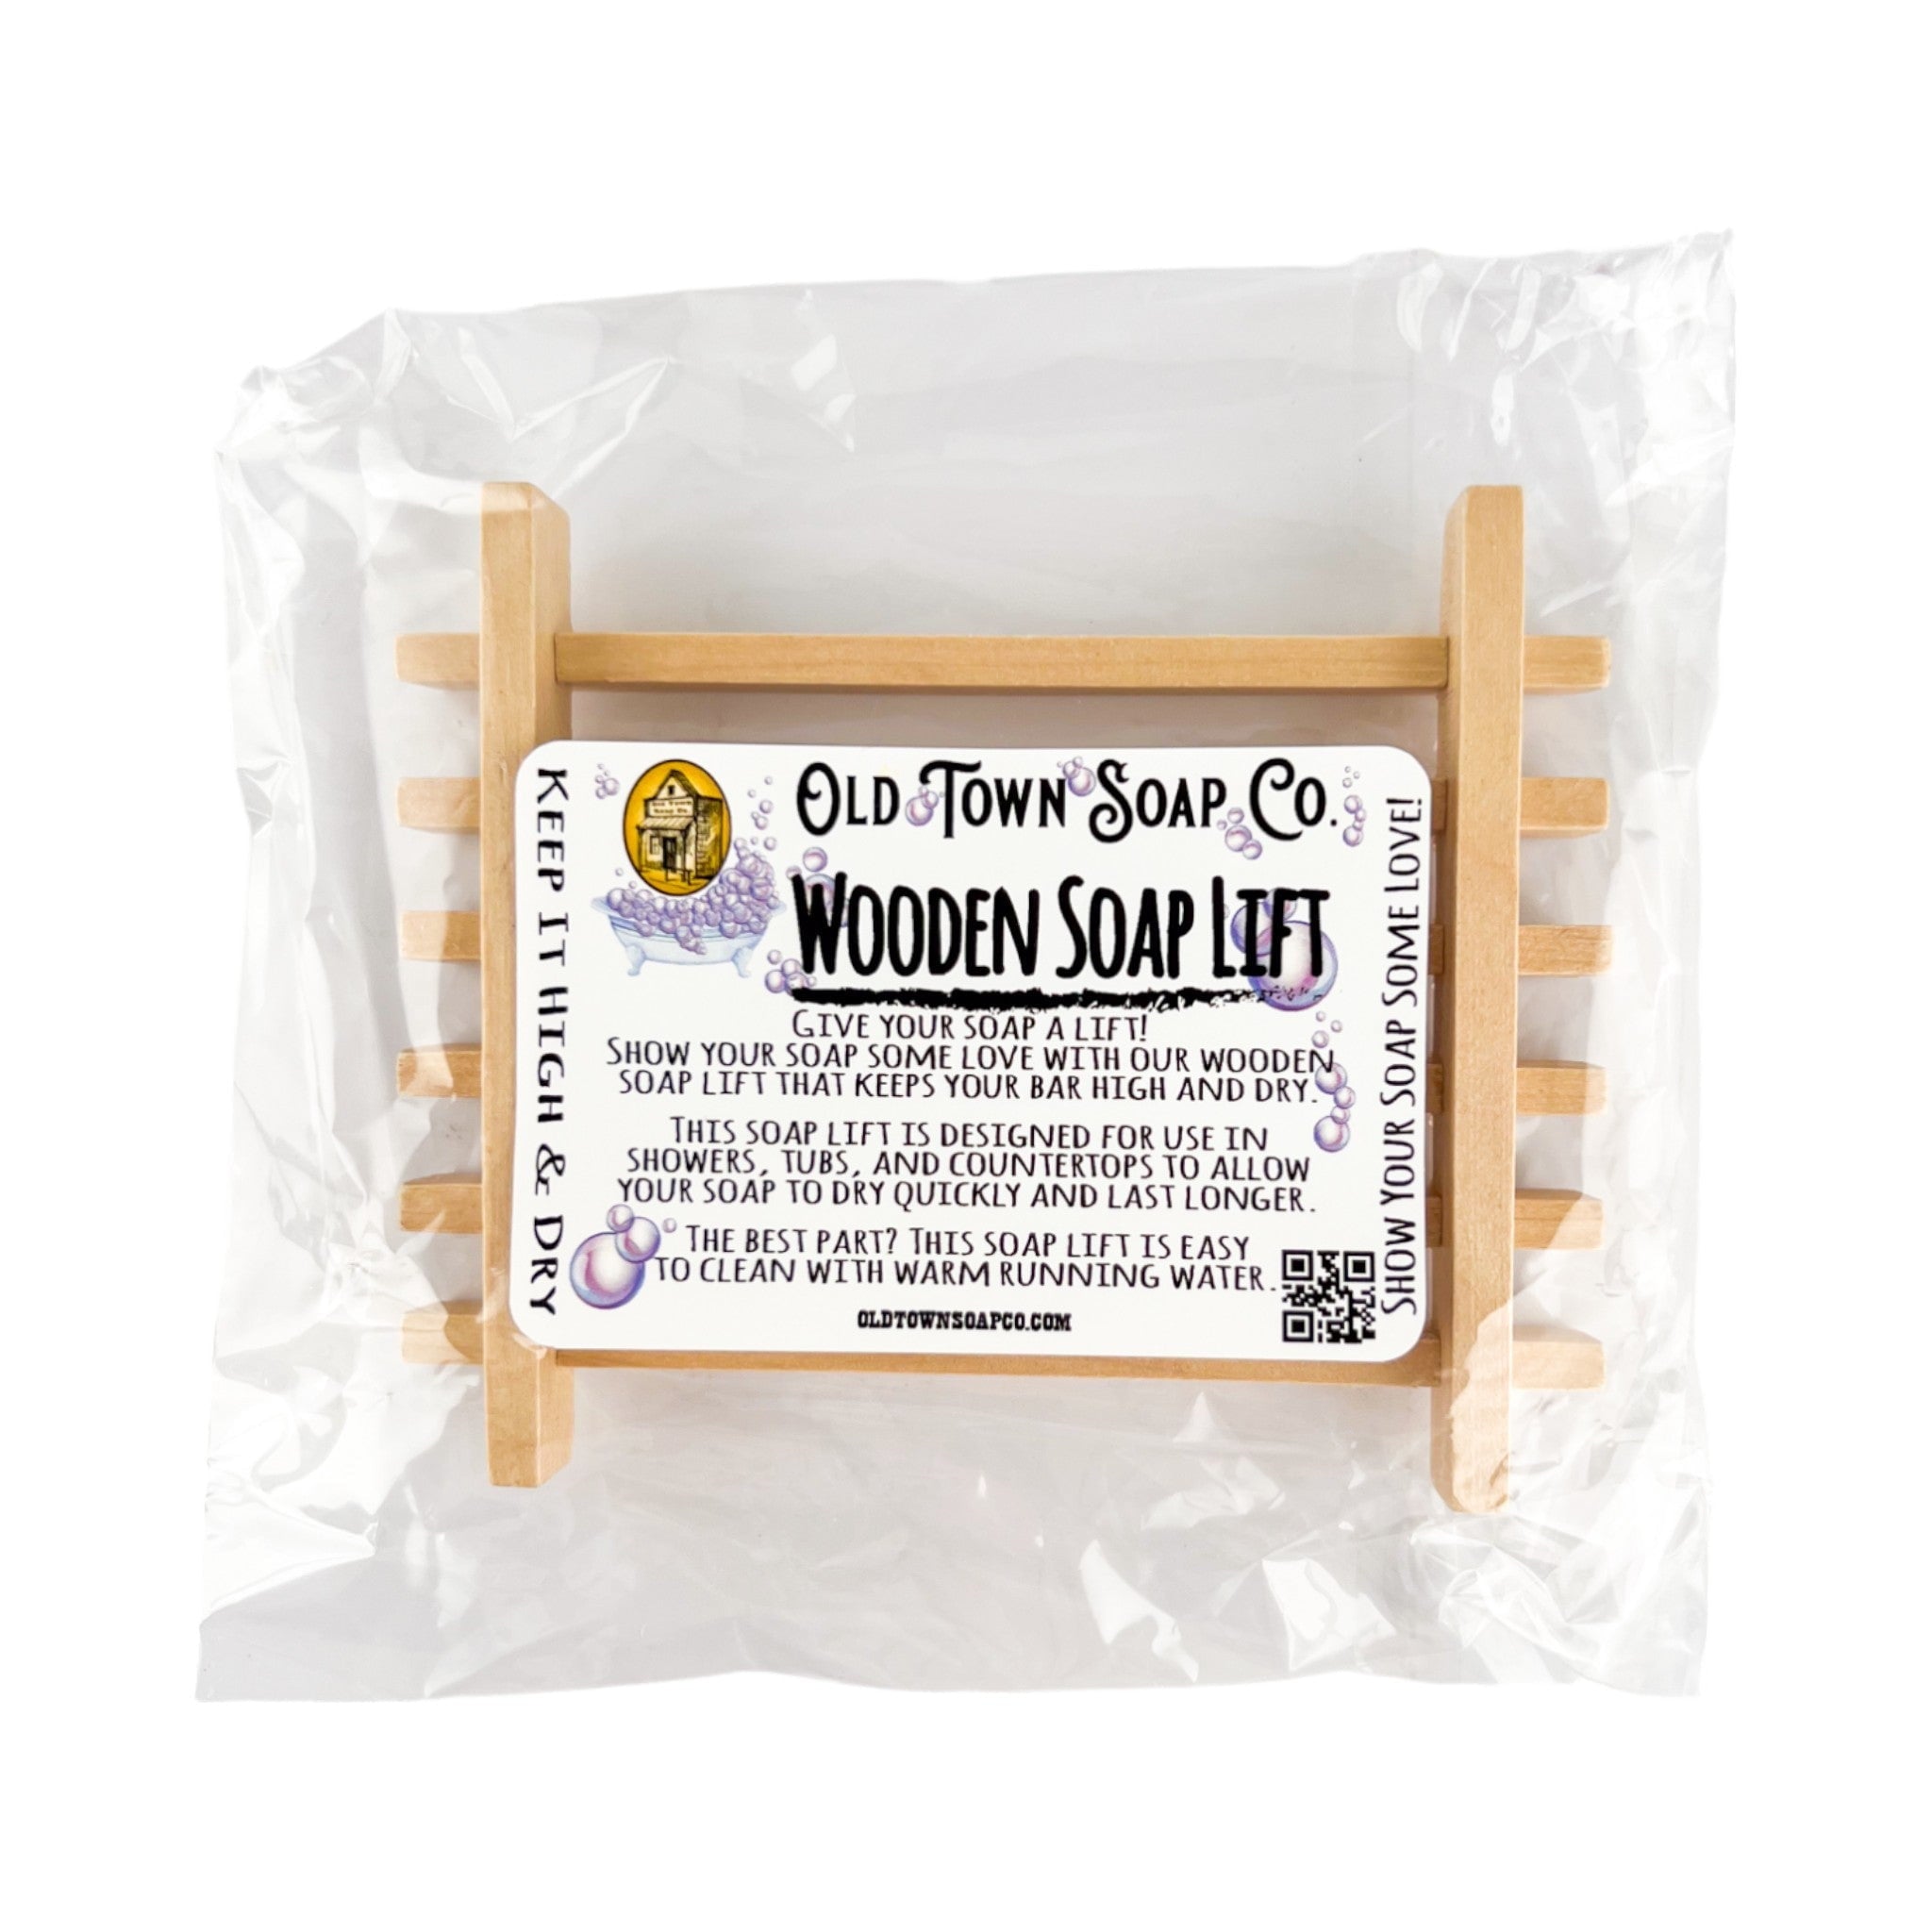 Wooden Soap Lift - Old Town Soap Co.